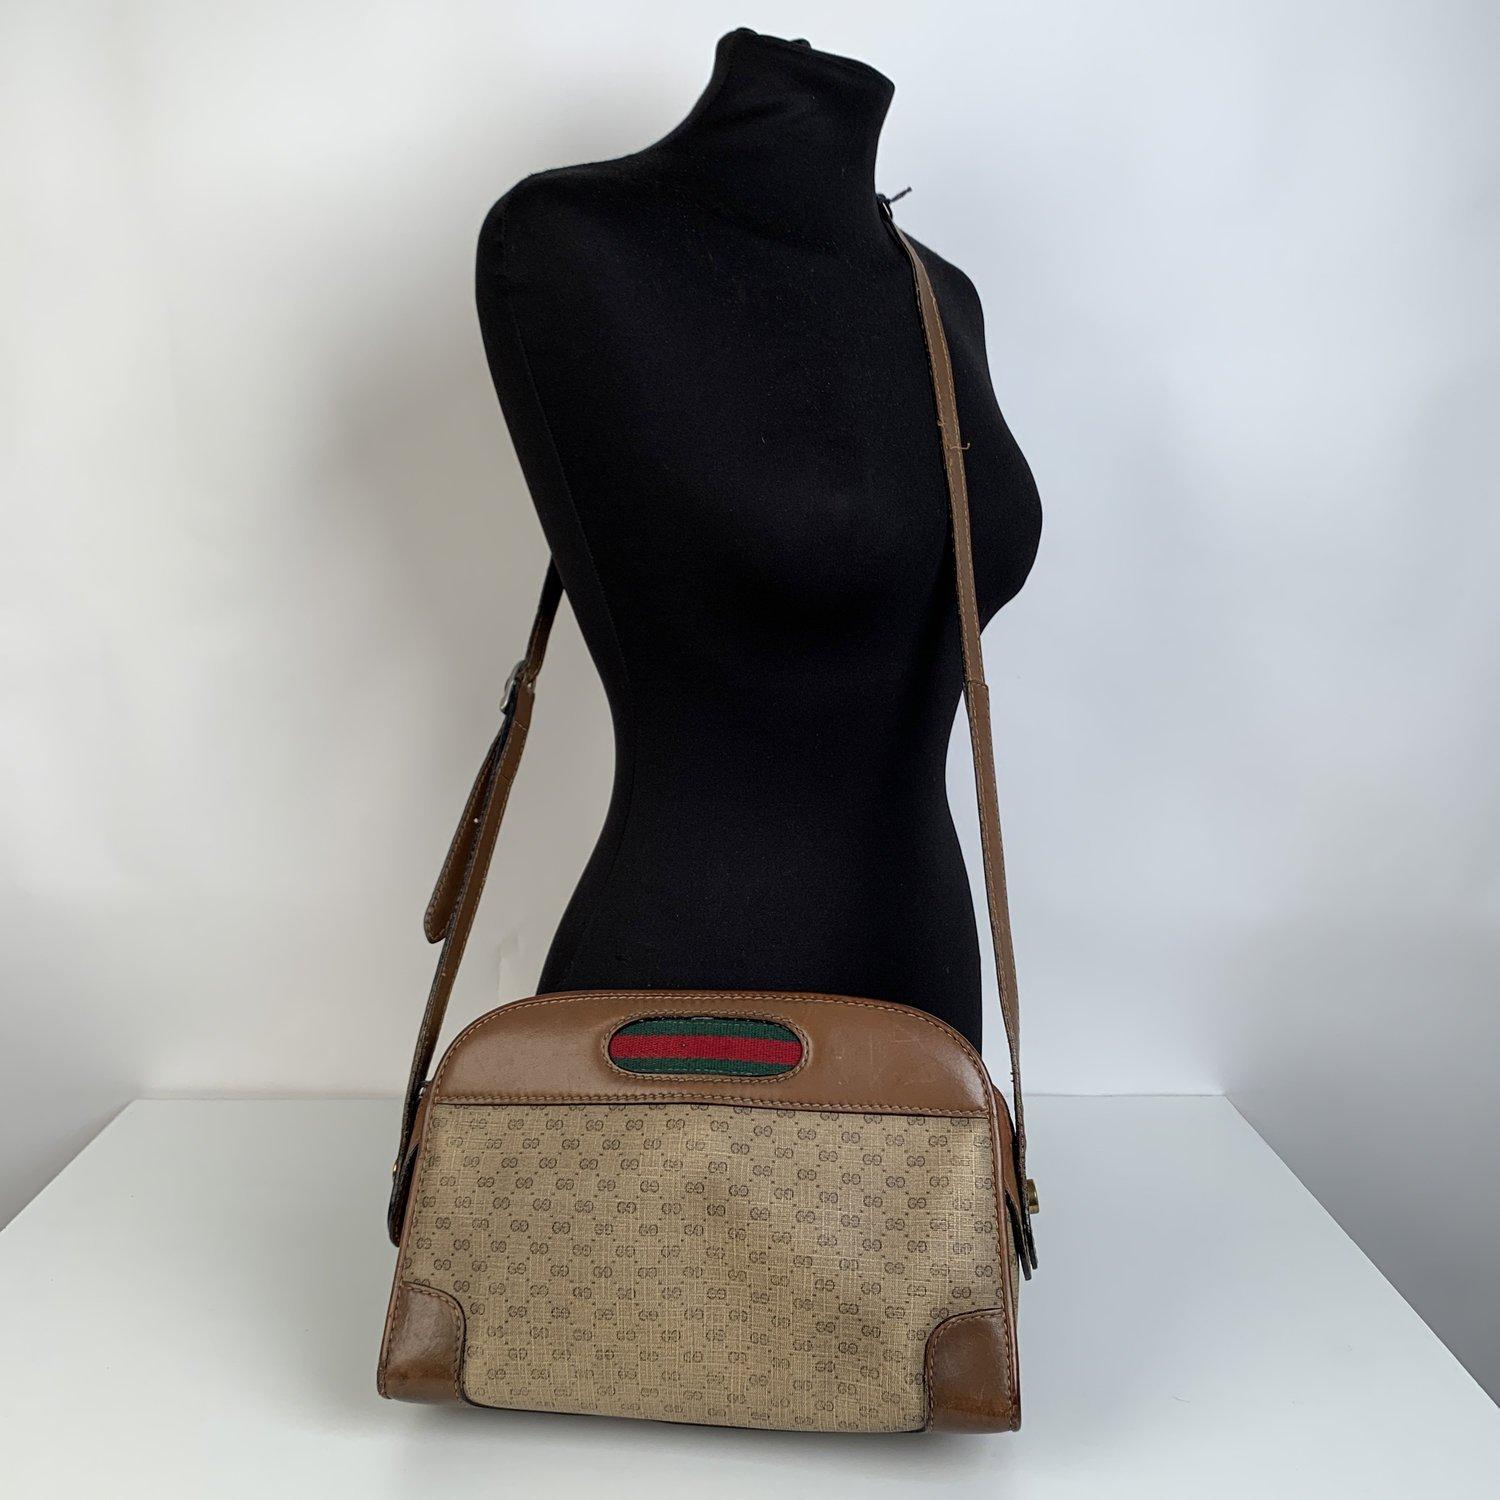 MATERIAL: Canvas COLOR: Brown MODEL: Messenger Bag GENDER: For Her SIZE: Medium Condition B - VERY GOOD Some wear of use on bottom corners. some black marks on leather bottom. The monogram canvas shows some fading on the front and on the back. A